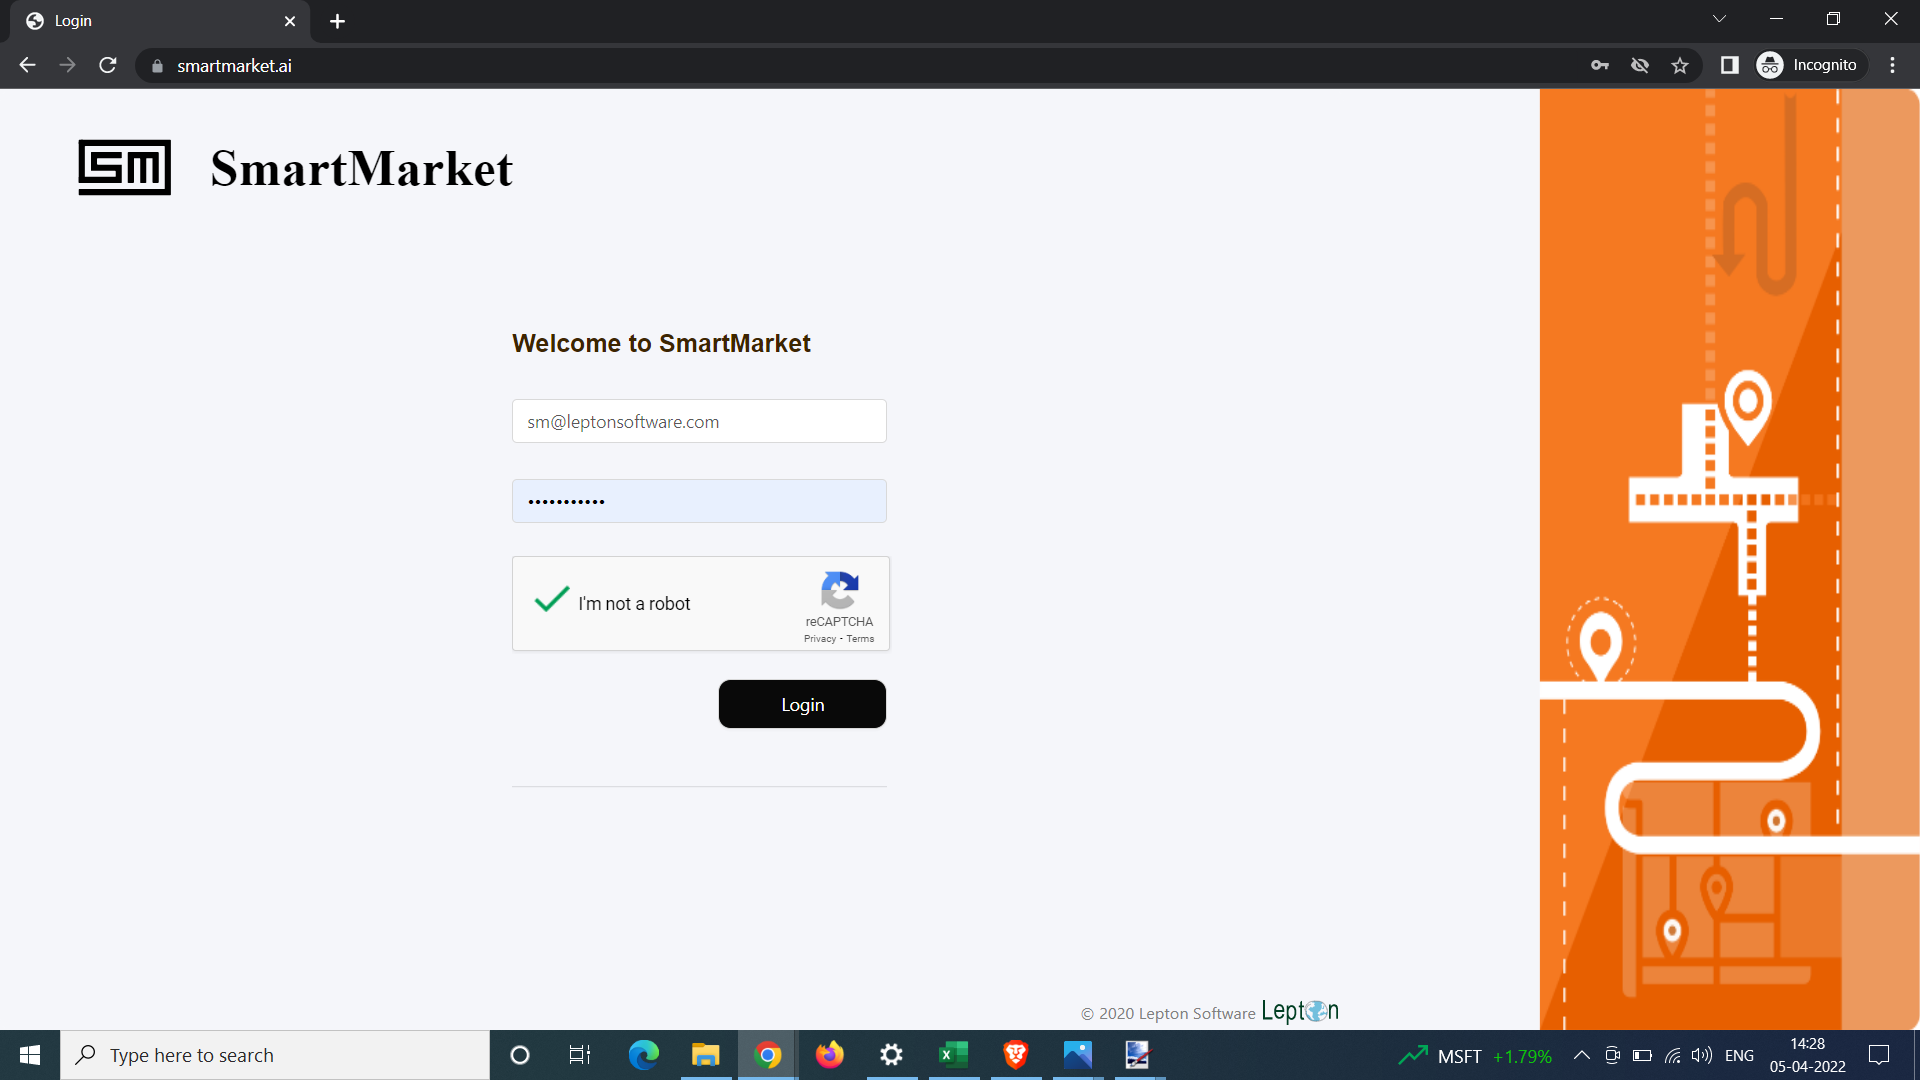 Smart Market by Lepton Software